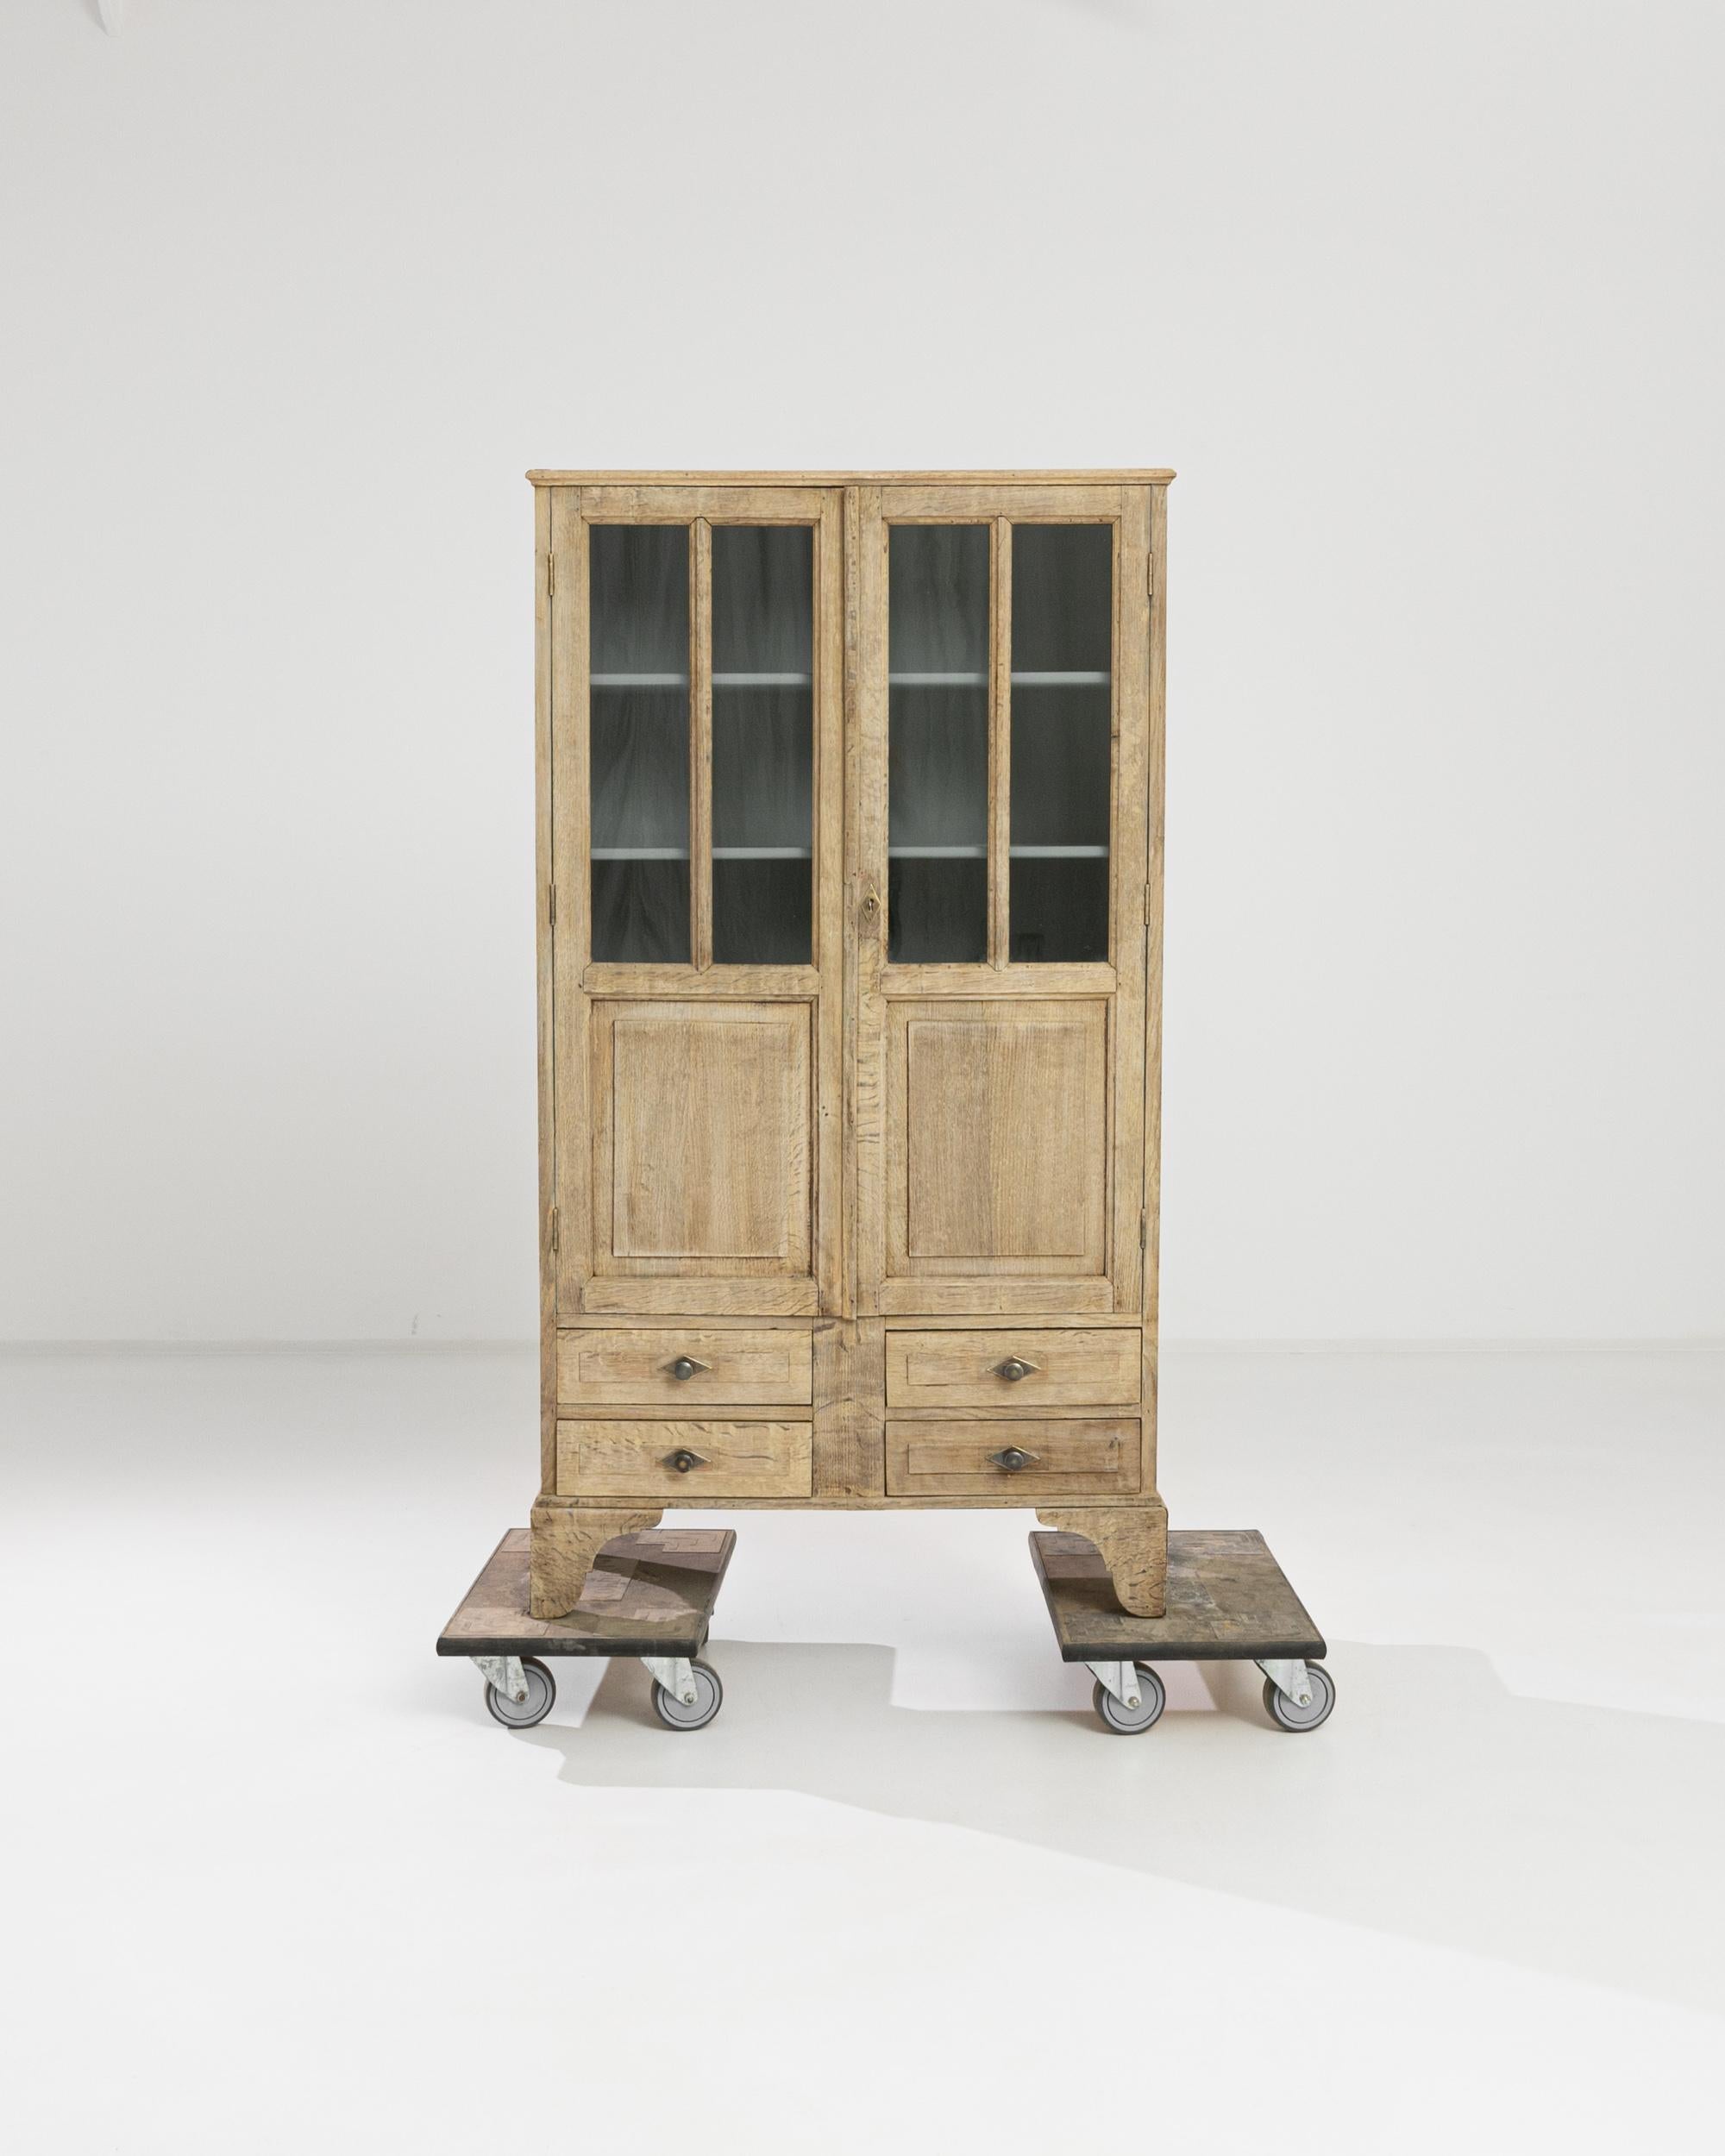 An oak vitrine from turn of the century France with a refined country aesthetic. The golden cornfield tone of the restored oak creates a warm, organic impression. The window panes of the upper cabinet peep onto interior shelves, painted sea-foam